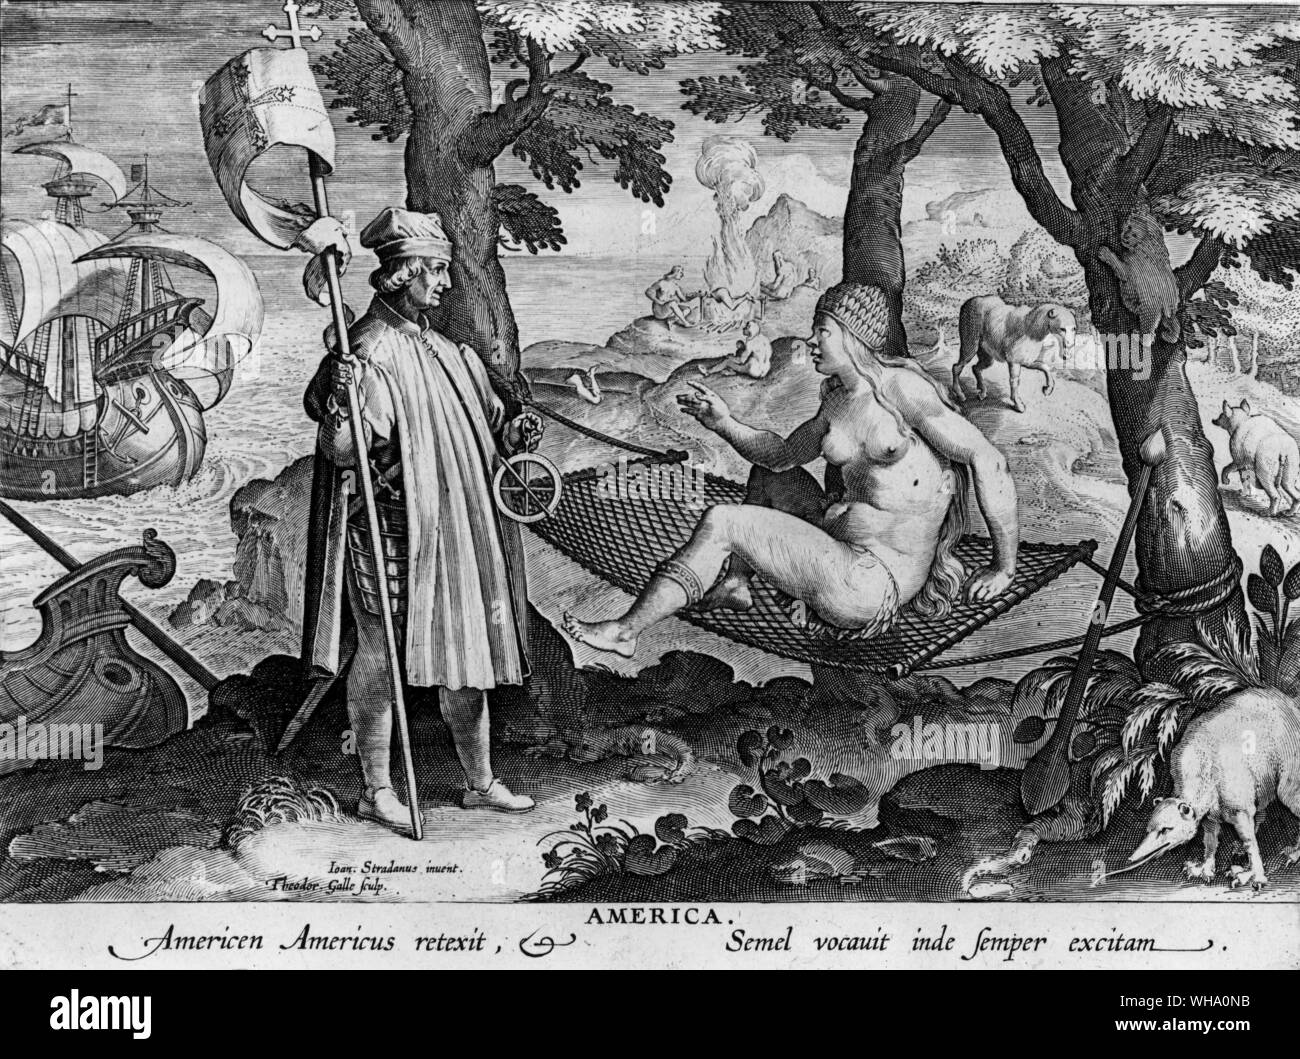 Vespucci discovering America. Engraving by Galle from drawing by Stradanus. Stock Photo